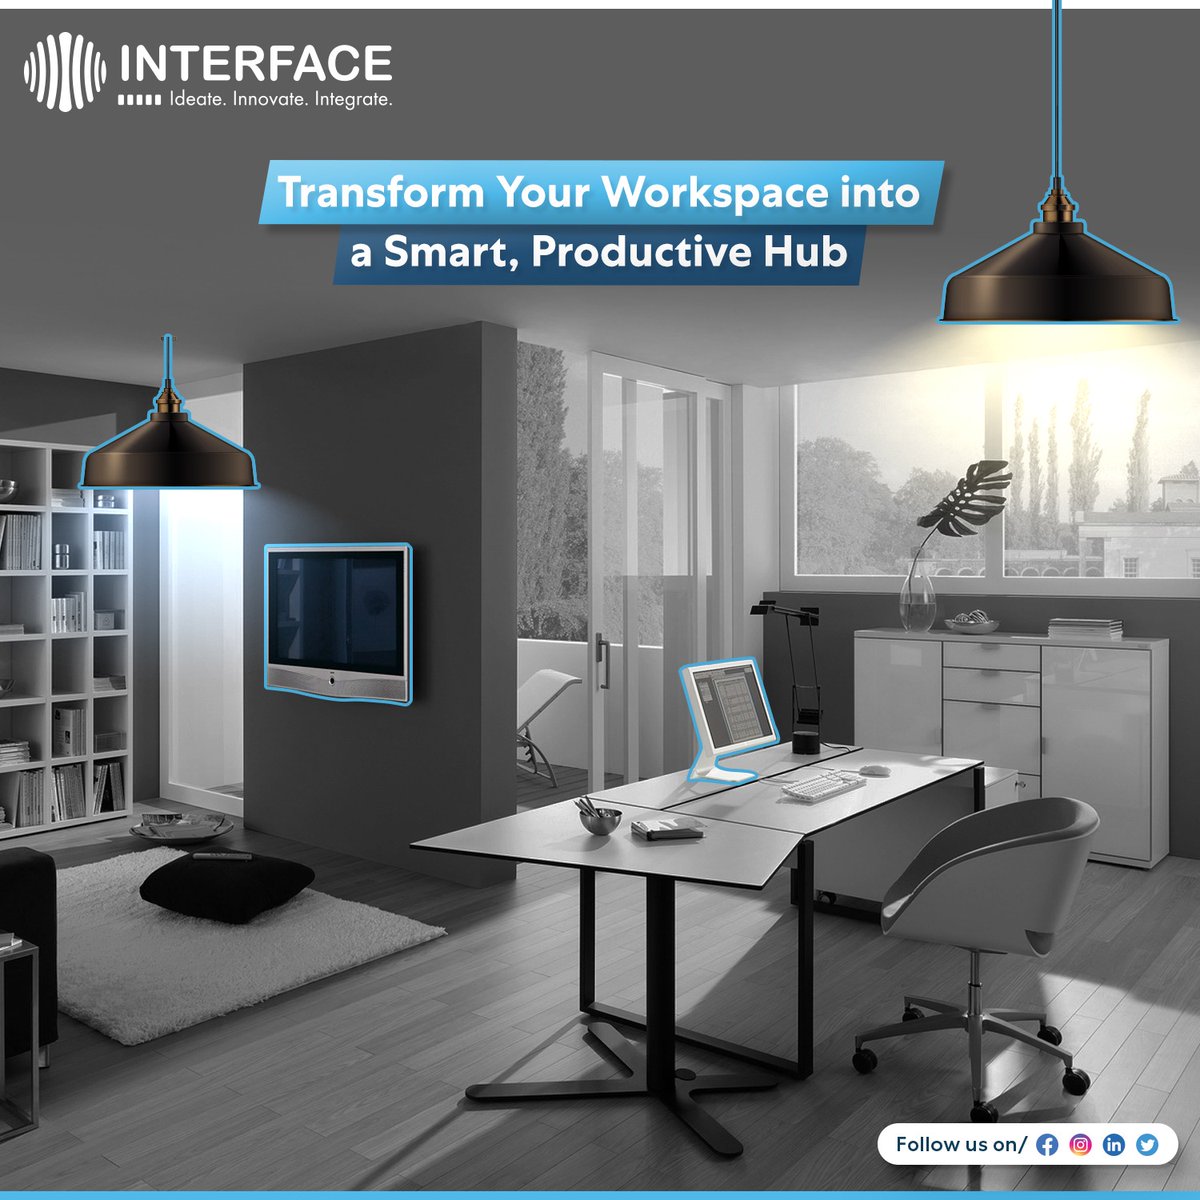 Experience seamless efficiency with corporate room automation.

#workspace #worklife #office #officeautomation #corporate #commercial #smartliving #automation